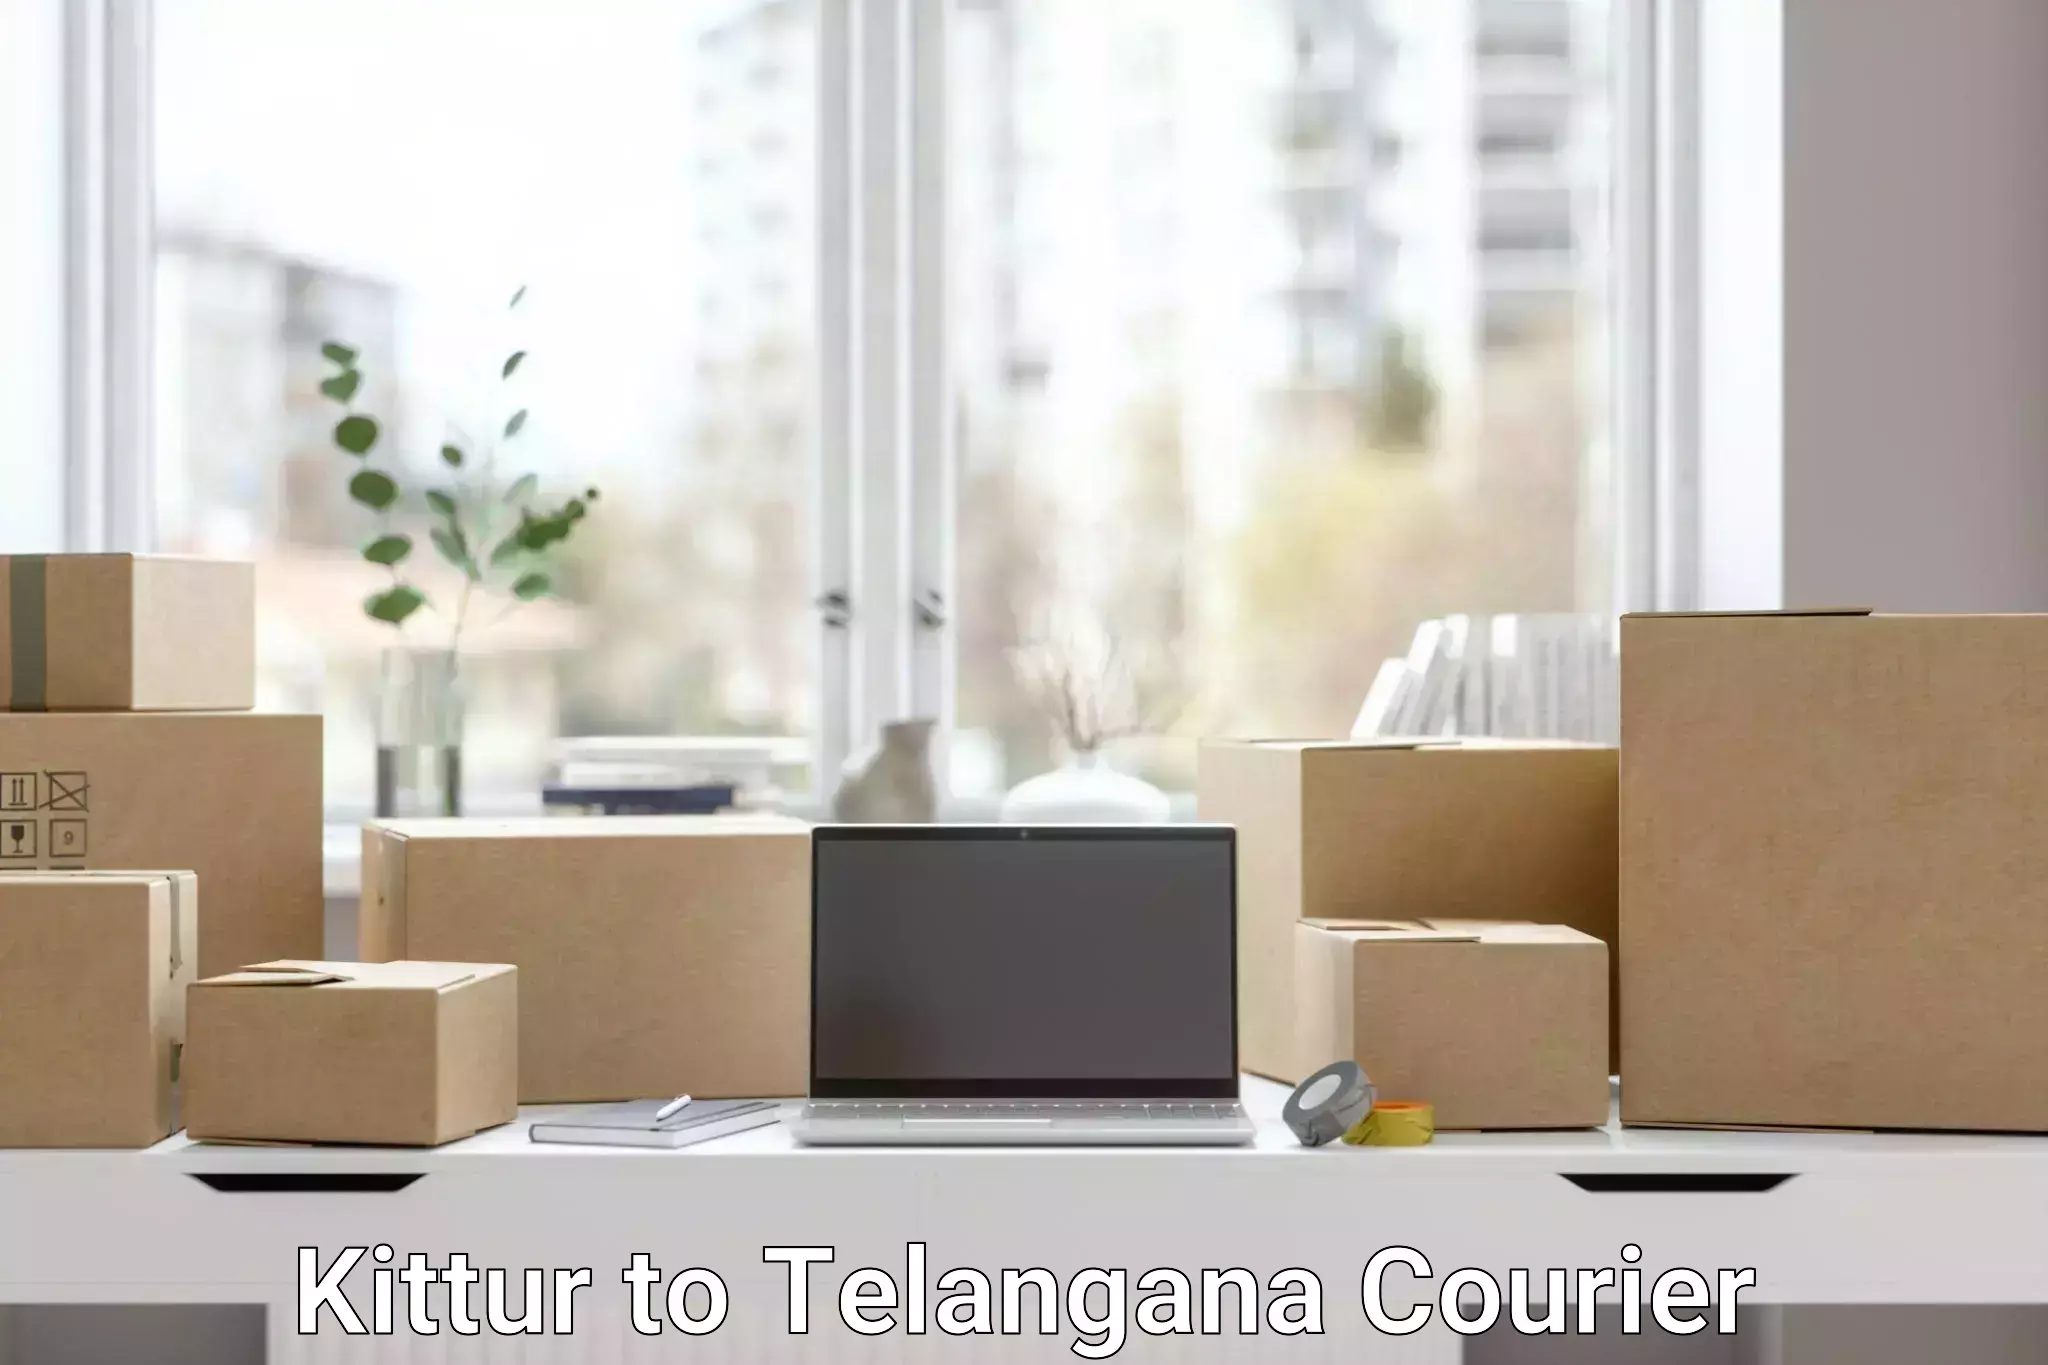 Professional courier services in Kittur to Hajipur Mancherial